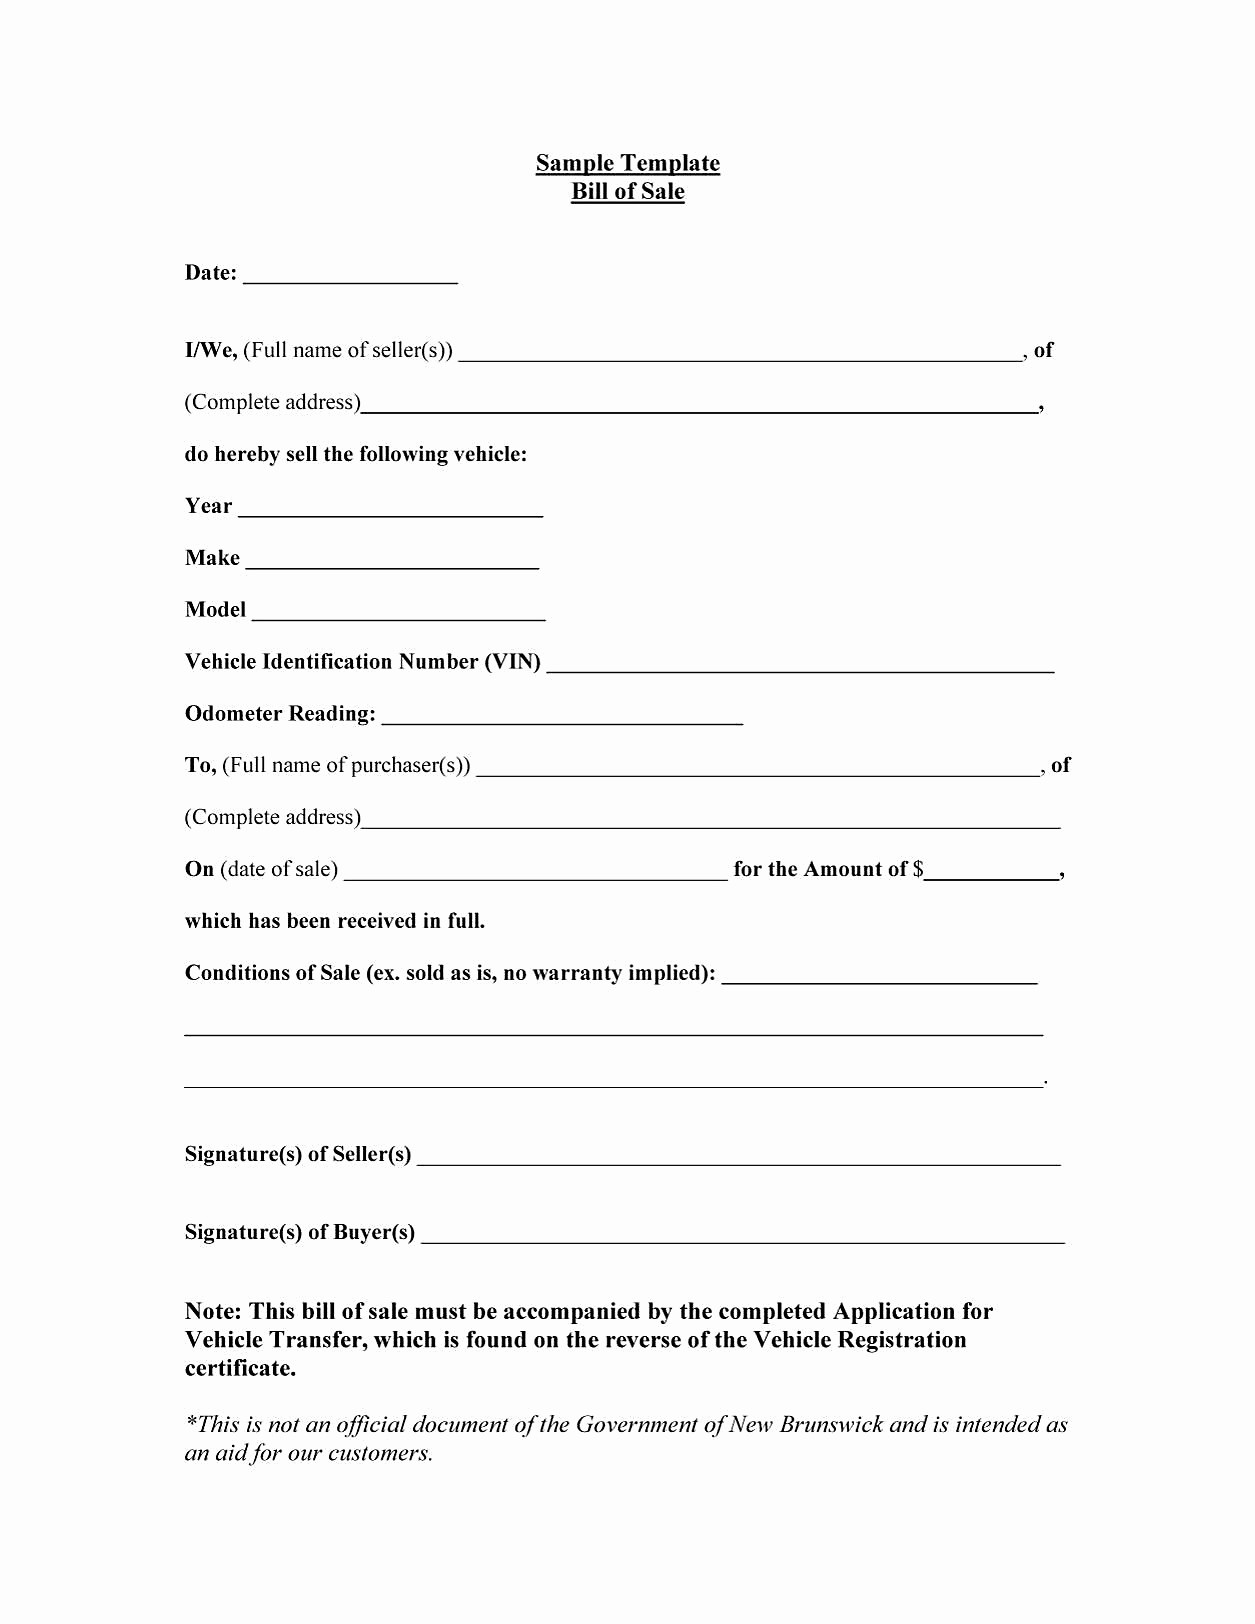 Automotive Bill Of Sale Printable Awesome Bill Sale Sample Document Mughals